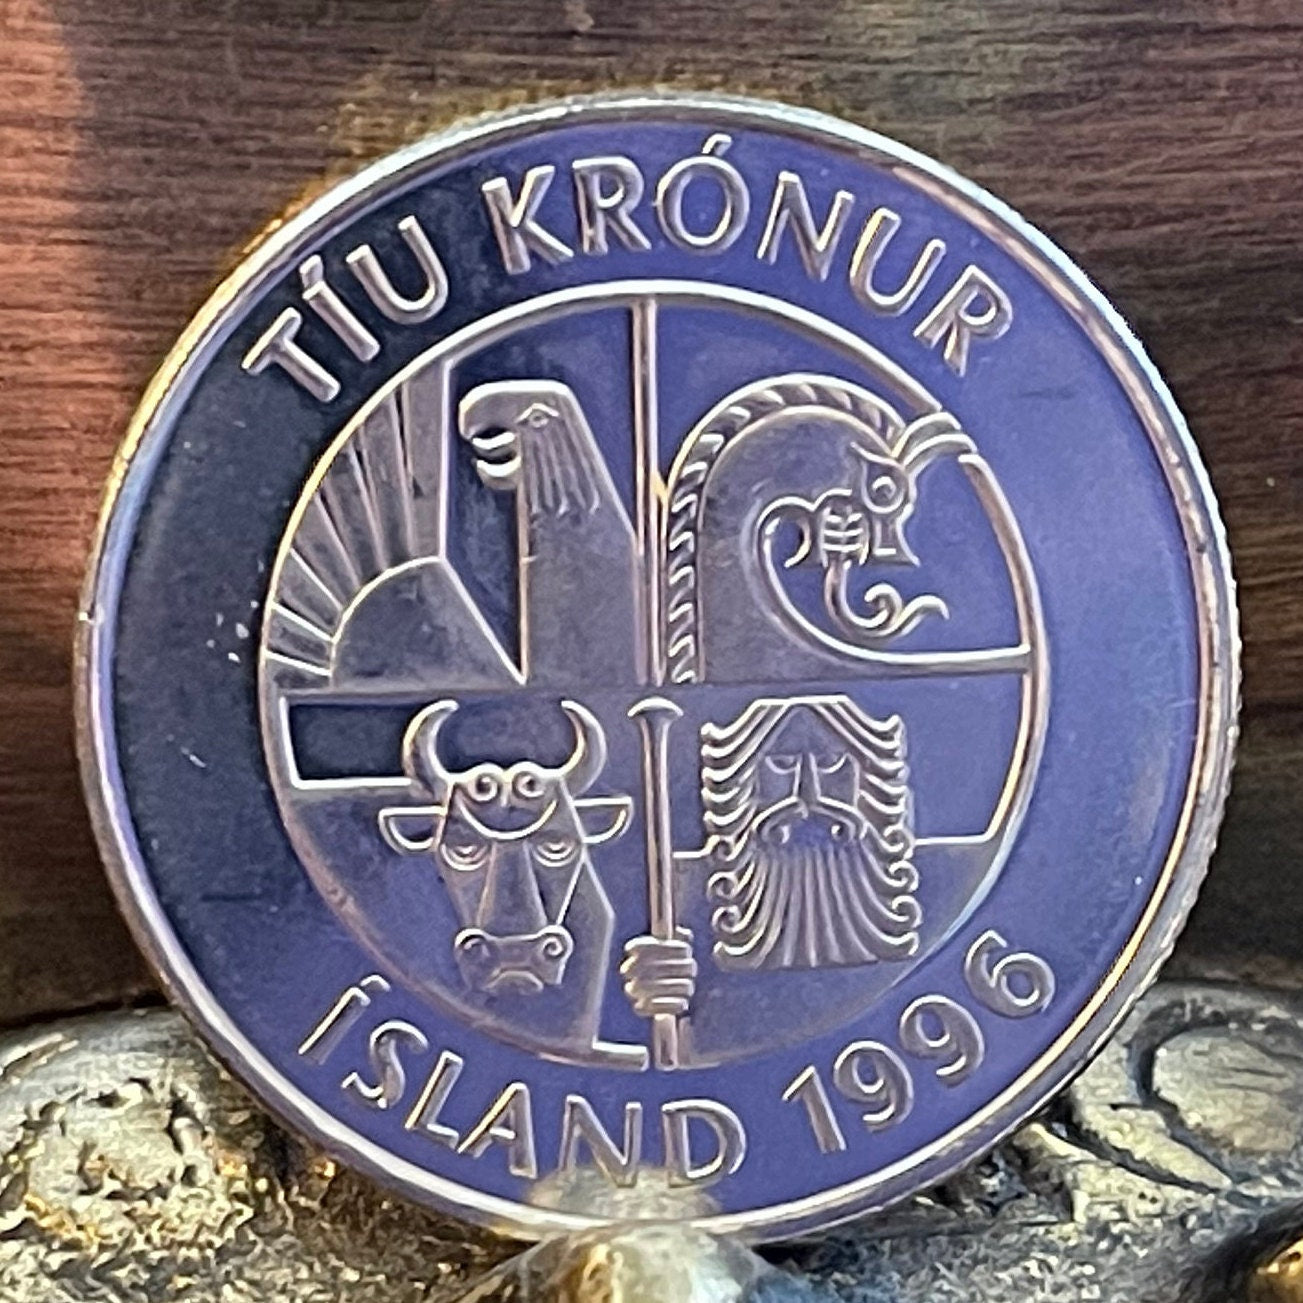  Icelandic 10 kroner 28mm Multi-Spring Fish European Coin  Collection Exquisite Collectibles Suitable for Gift Gift Collectors for Coin  Collectors : Toys & Games